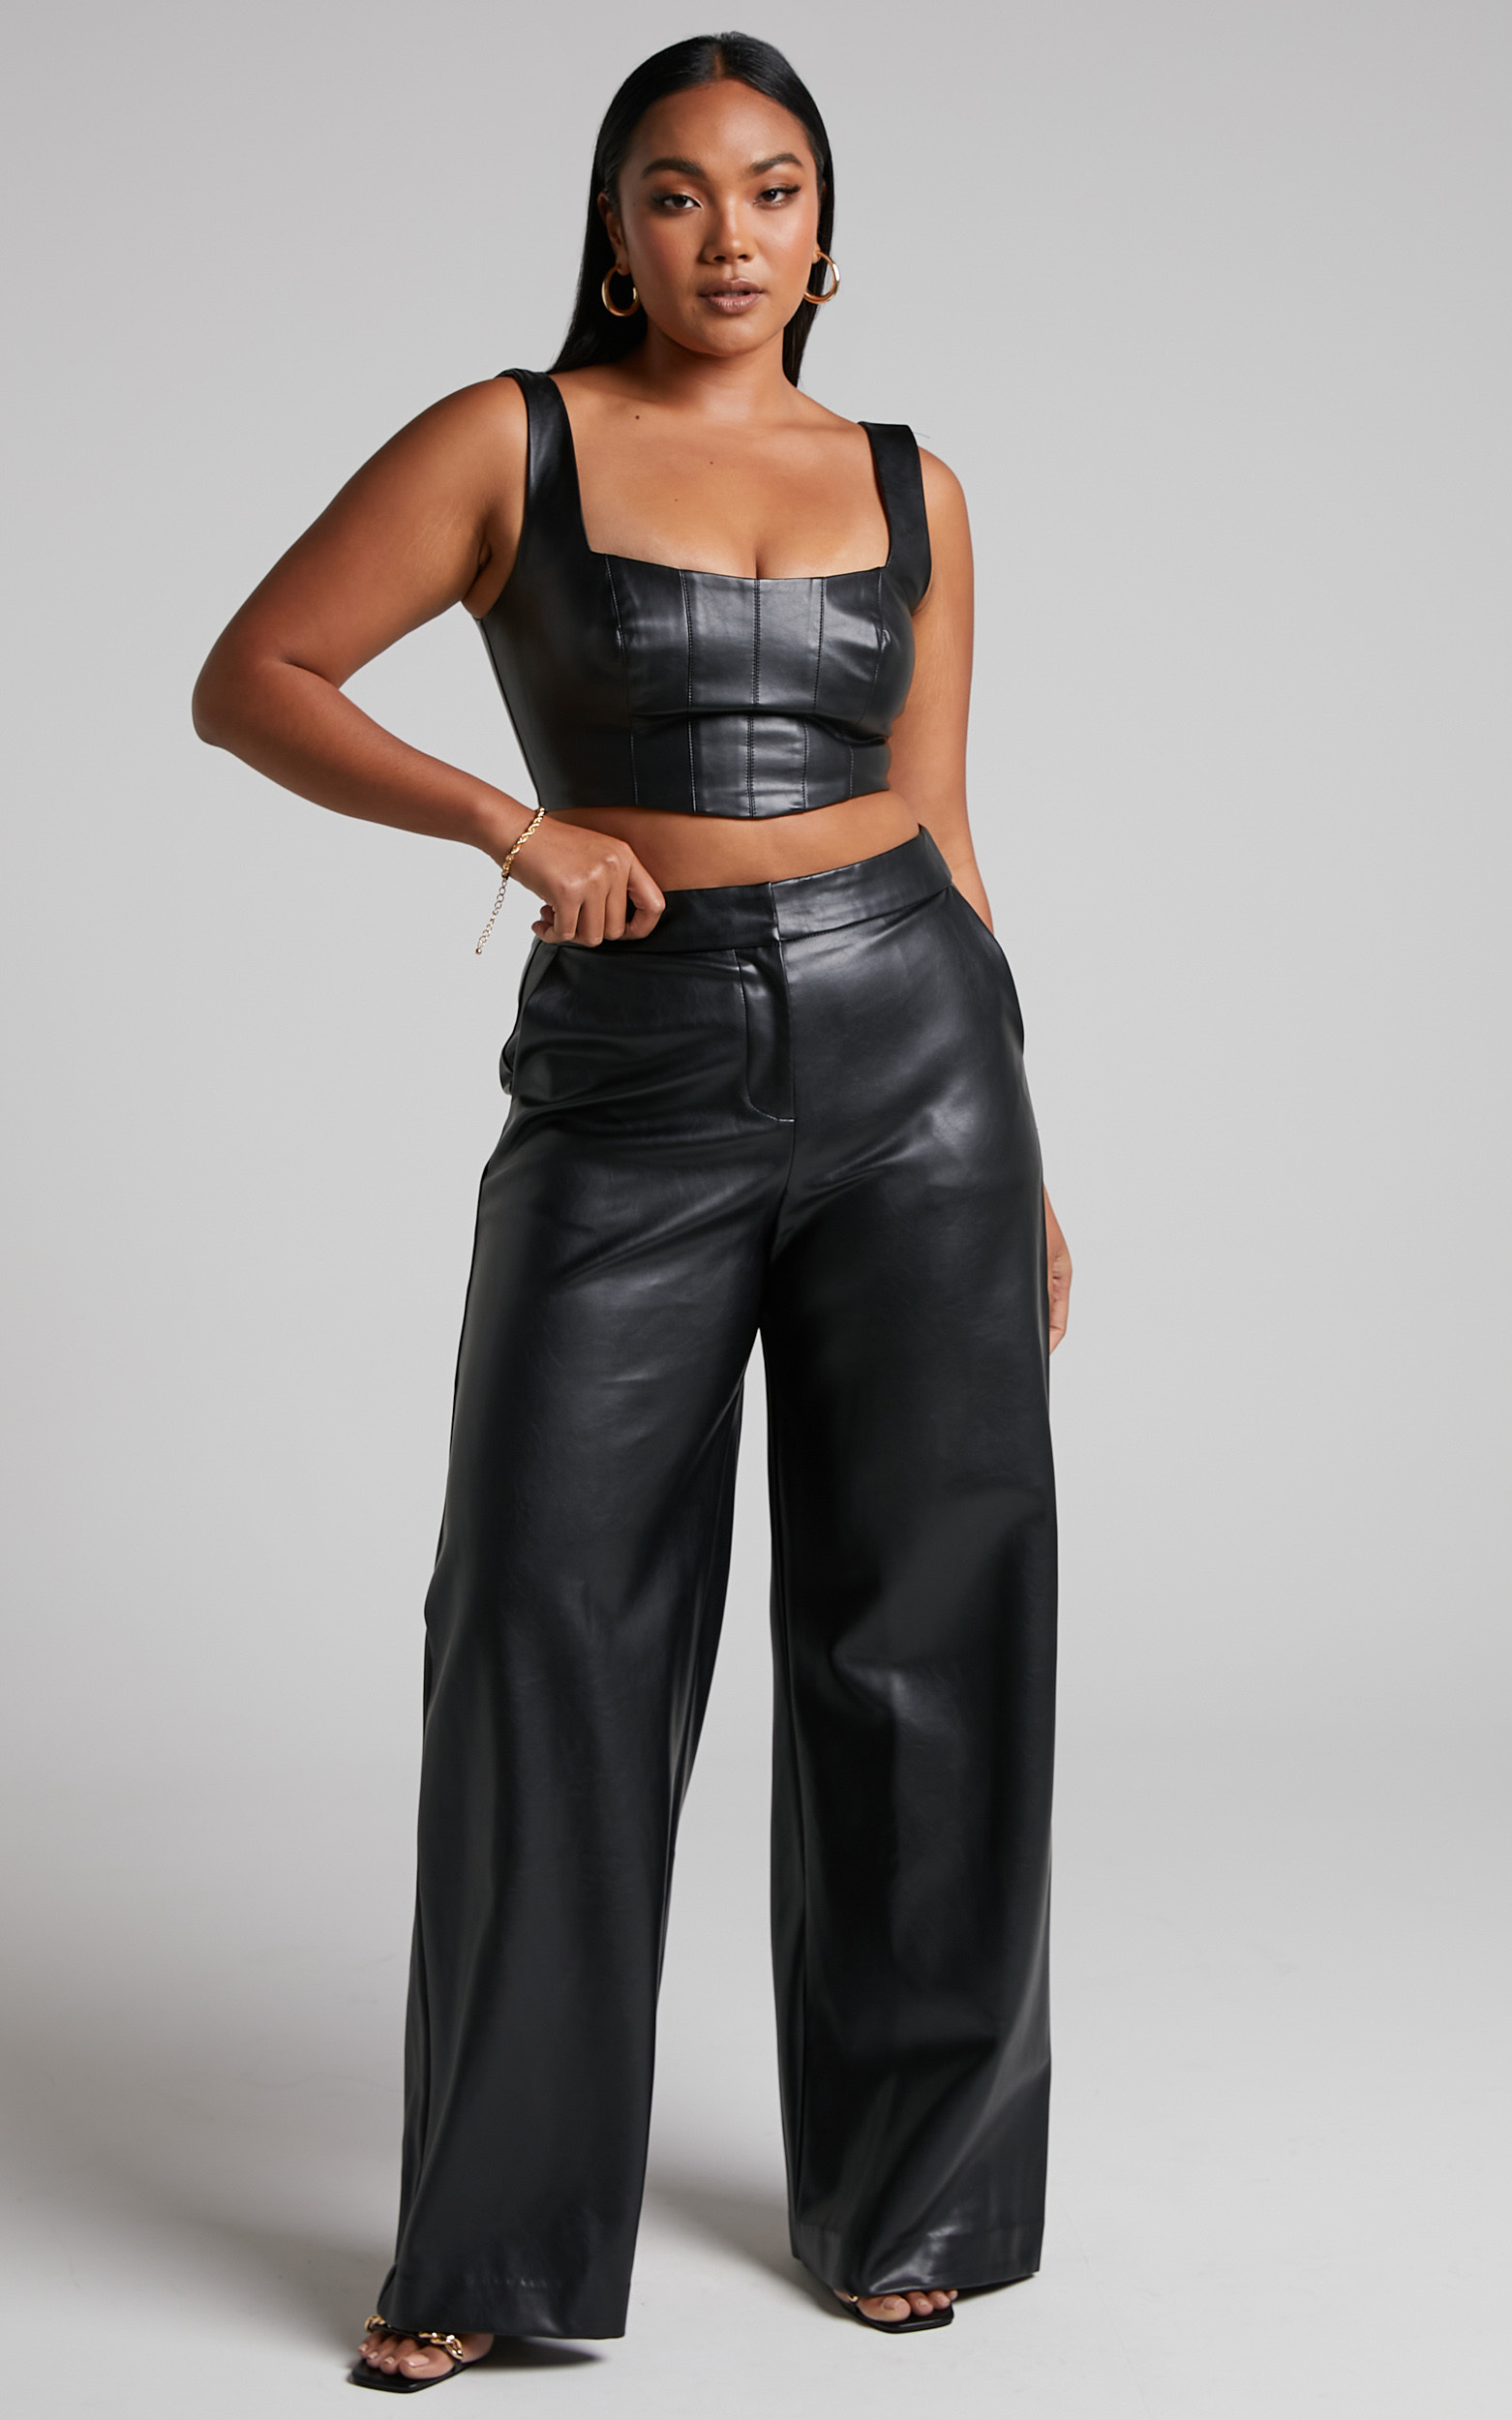 Minx Faux Leather Wide Leg Trousers in Black - 04, BLK1, hi-res image number null